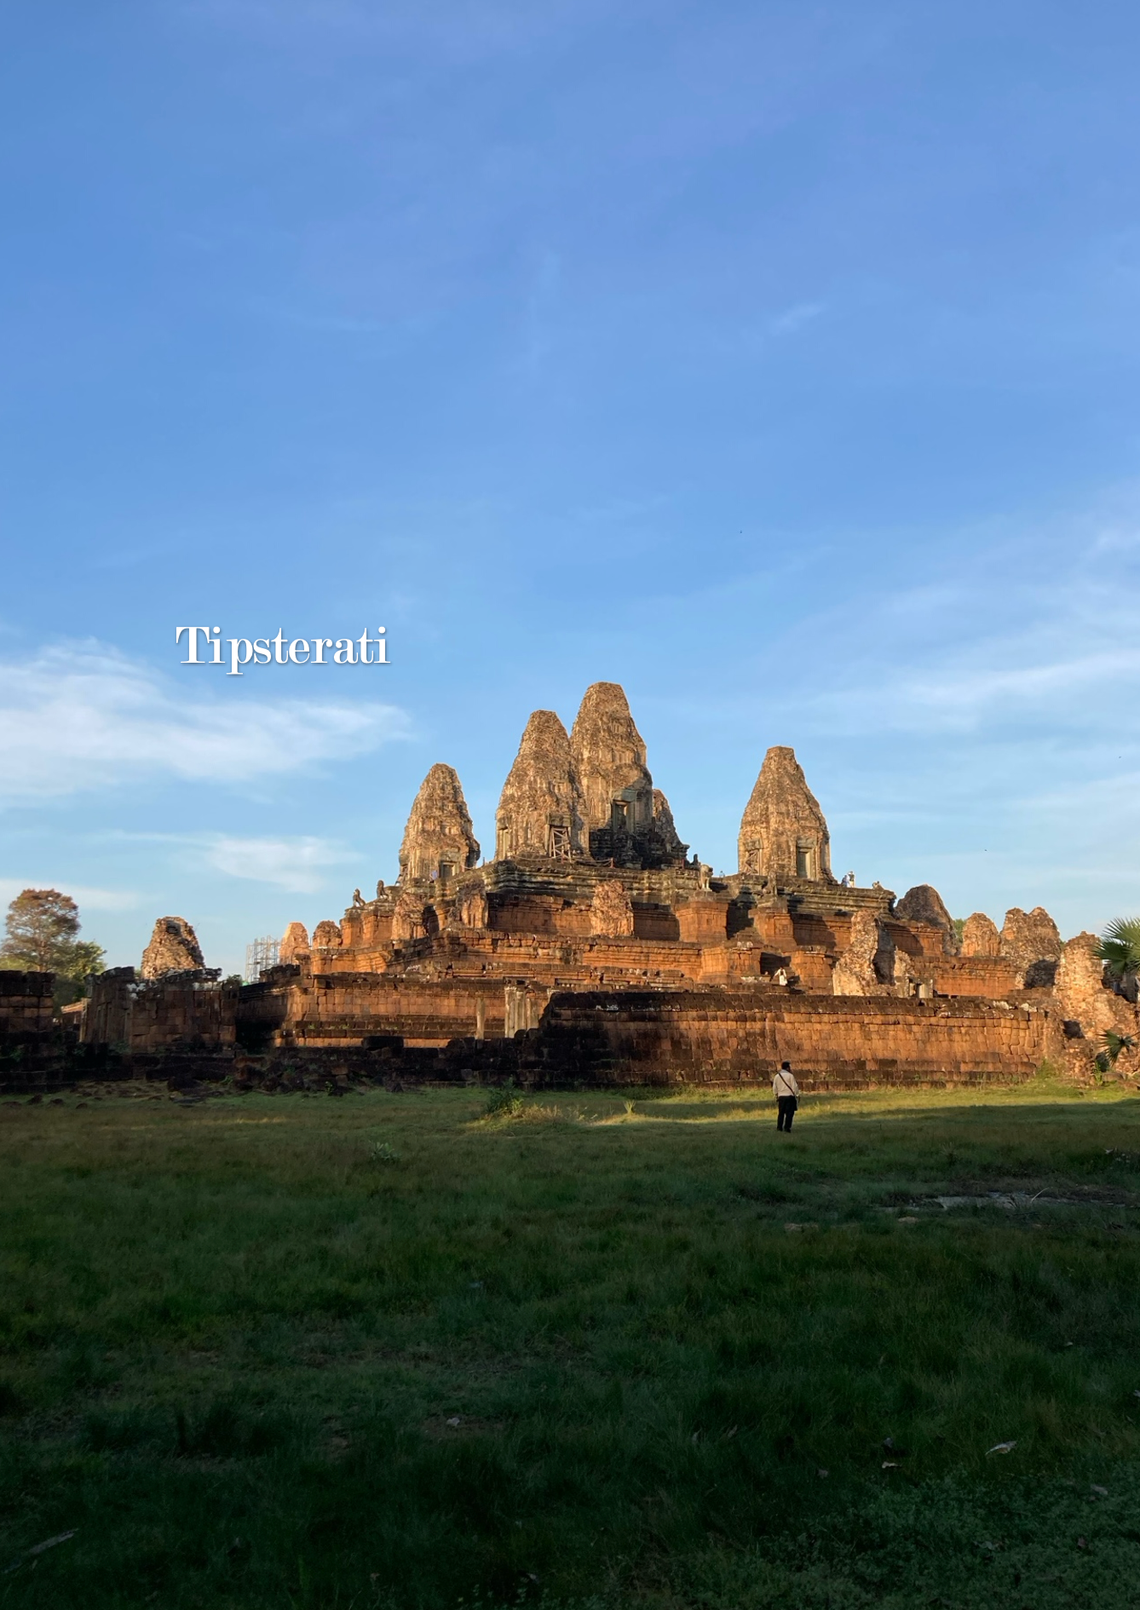 The stupas of Pre Rup against a blue sky with a small figure in the distance looking at the temple